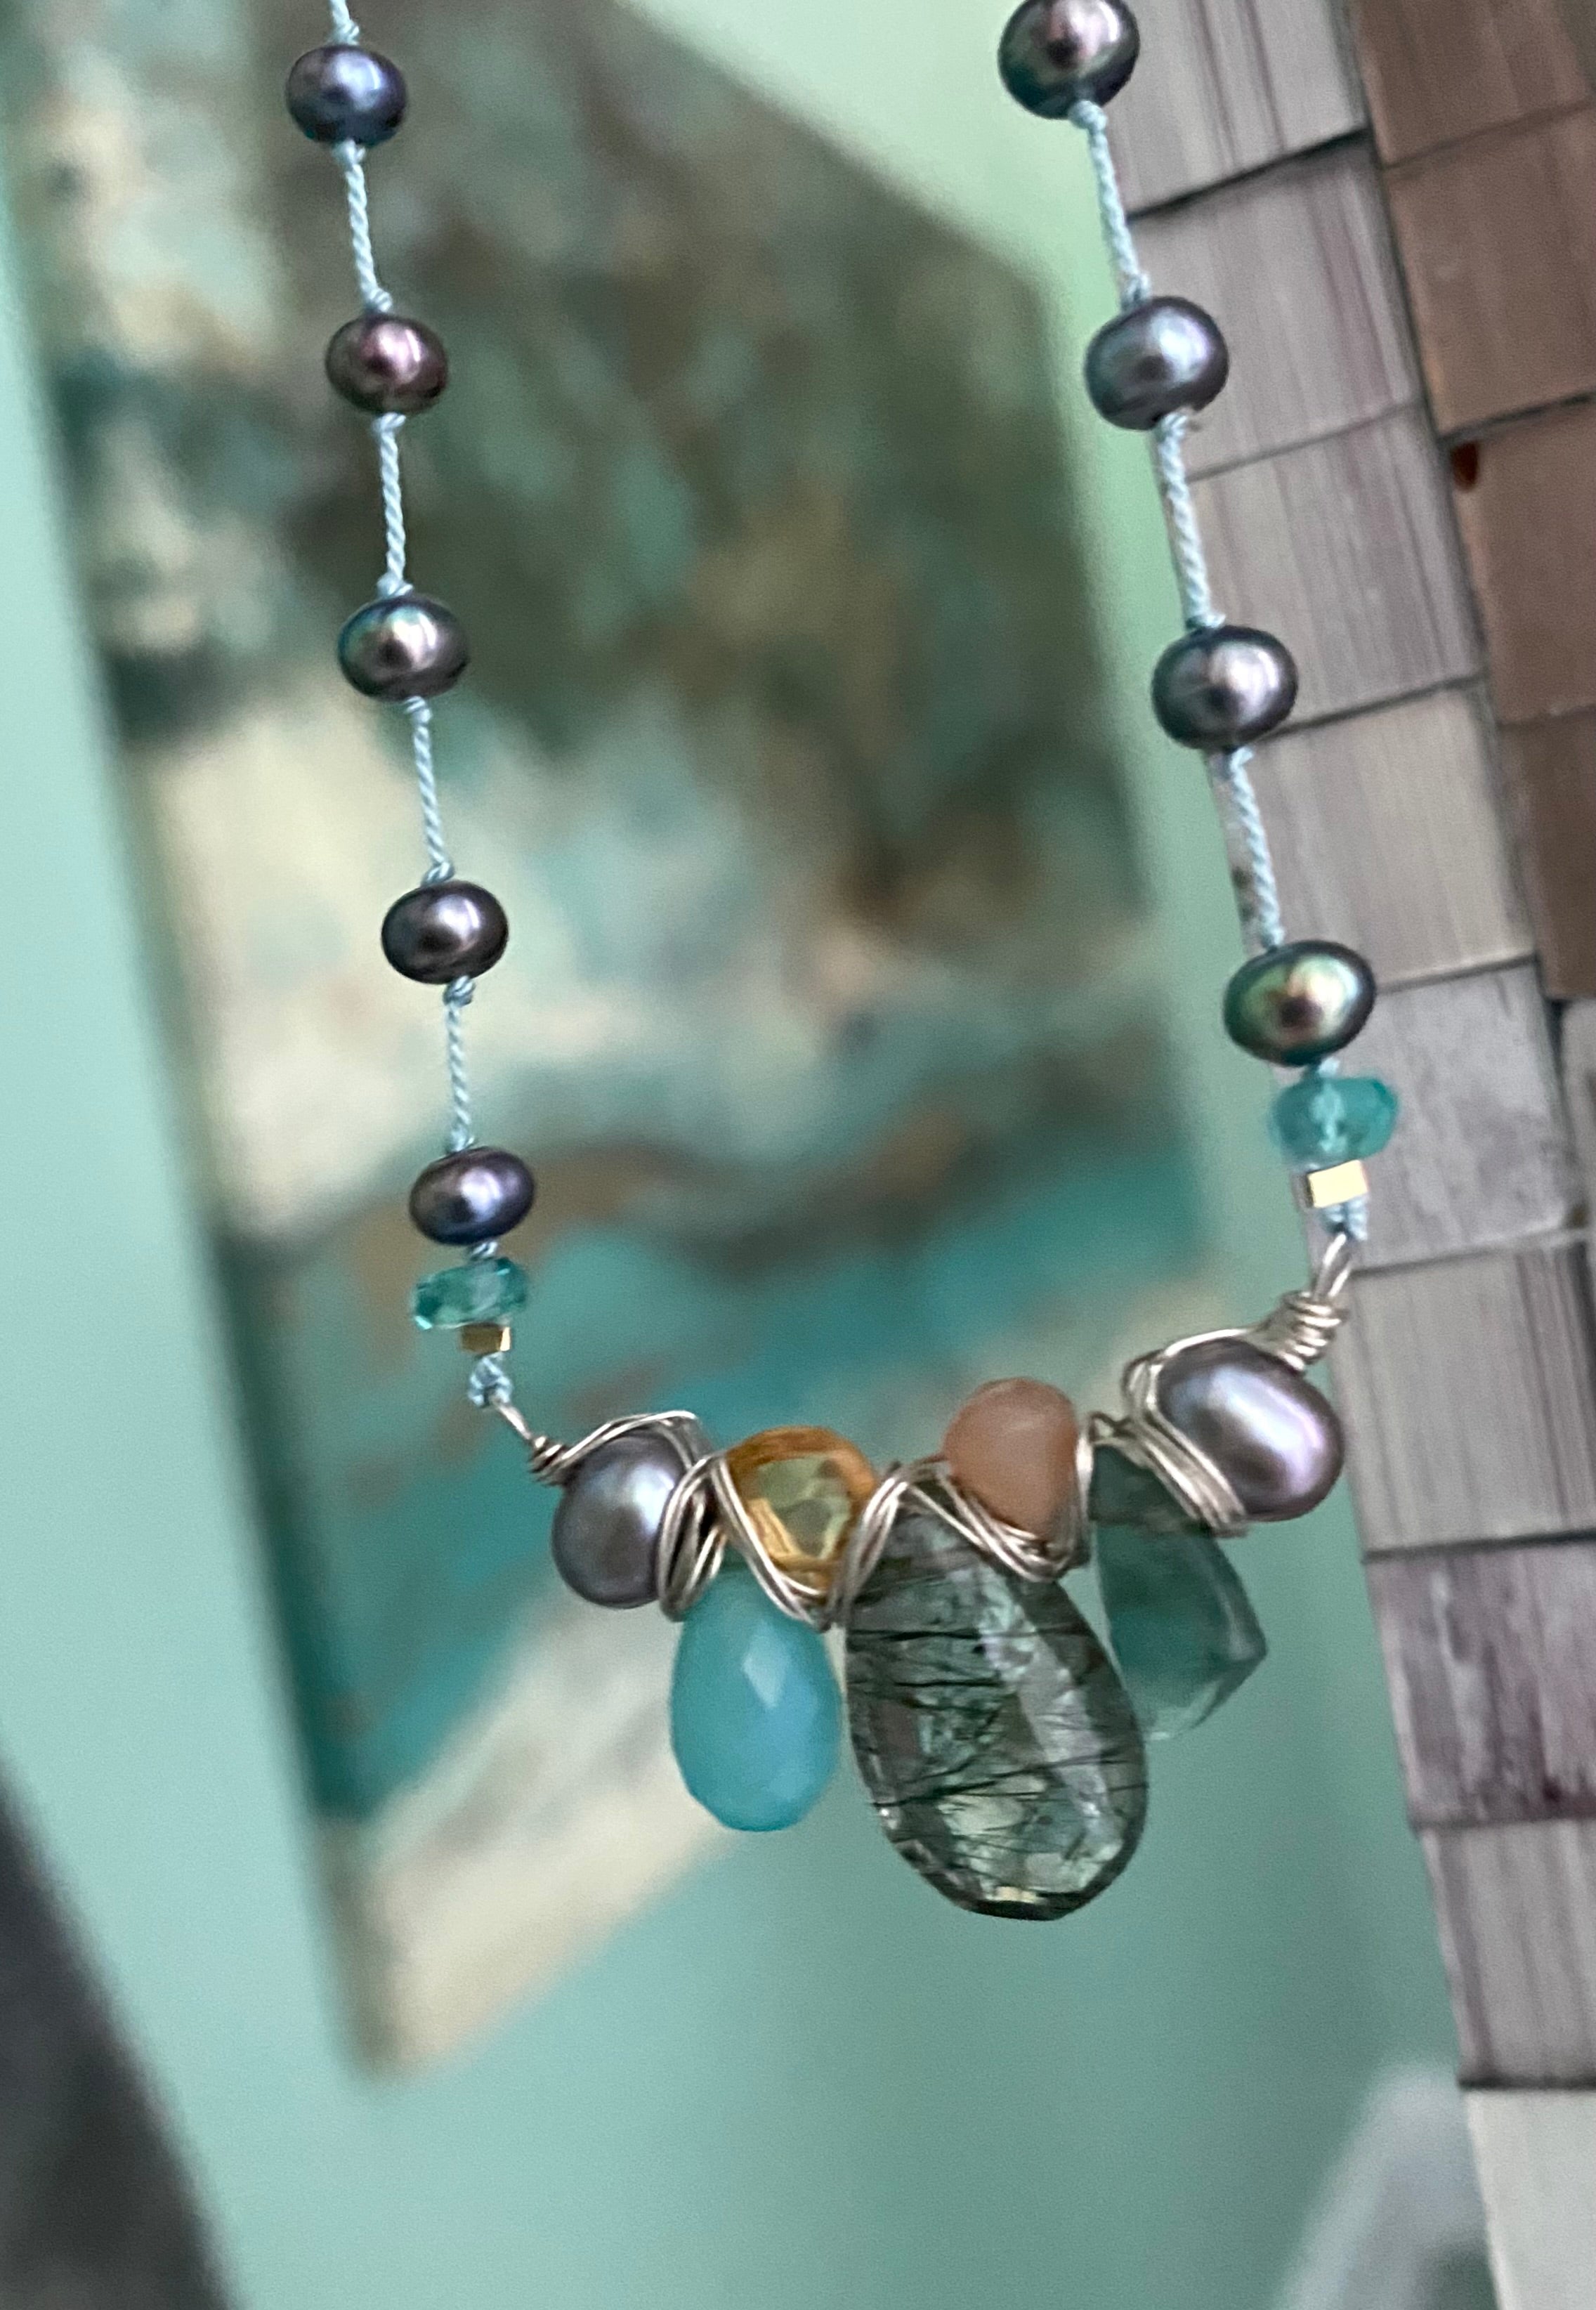 Knotted pearl necklace w/ gemstones - sky